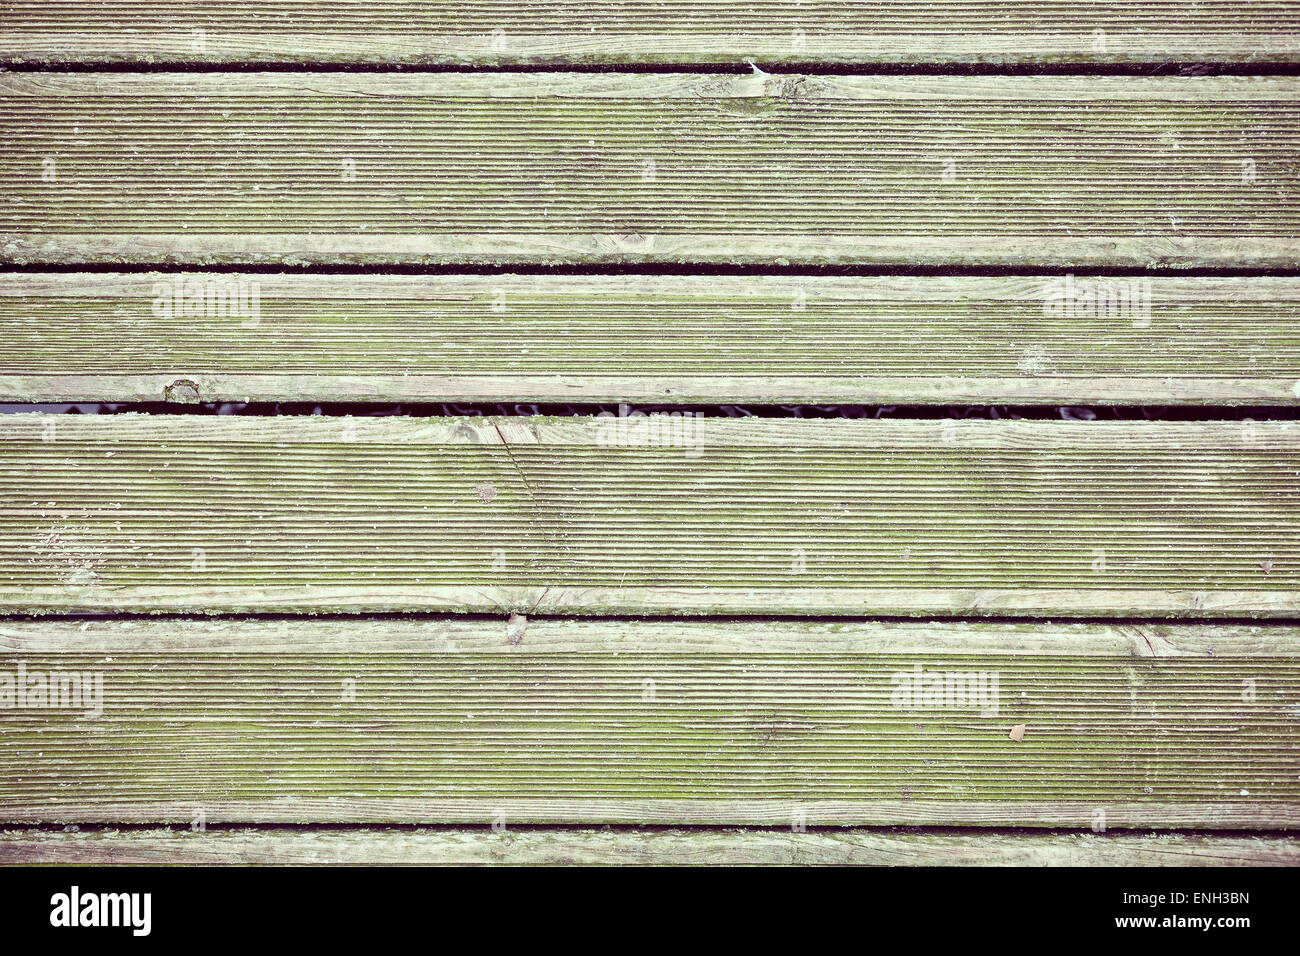 Retro style old wooden grunge pier floor, background or texture. Stock Photo